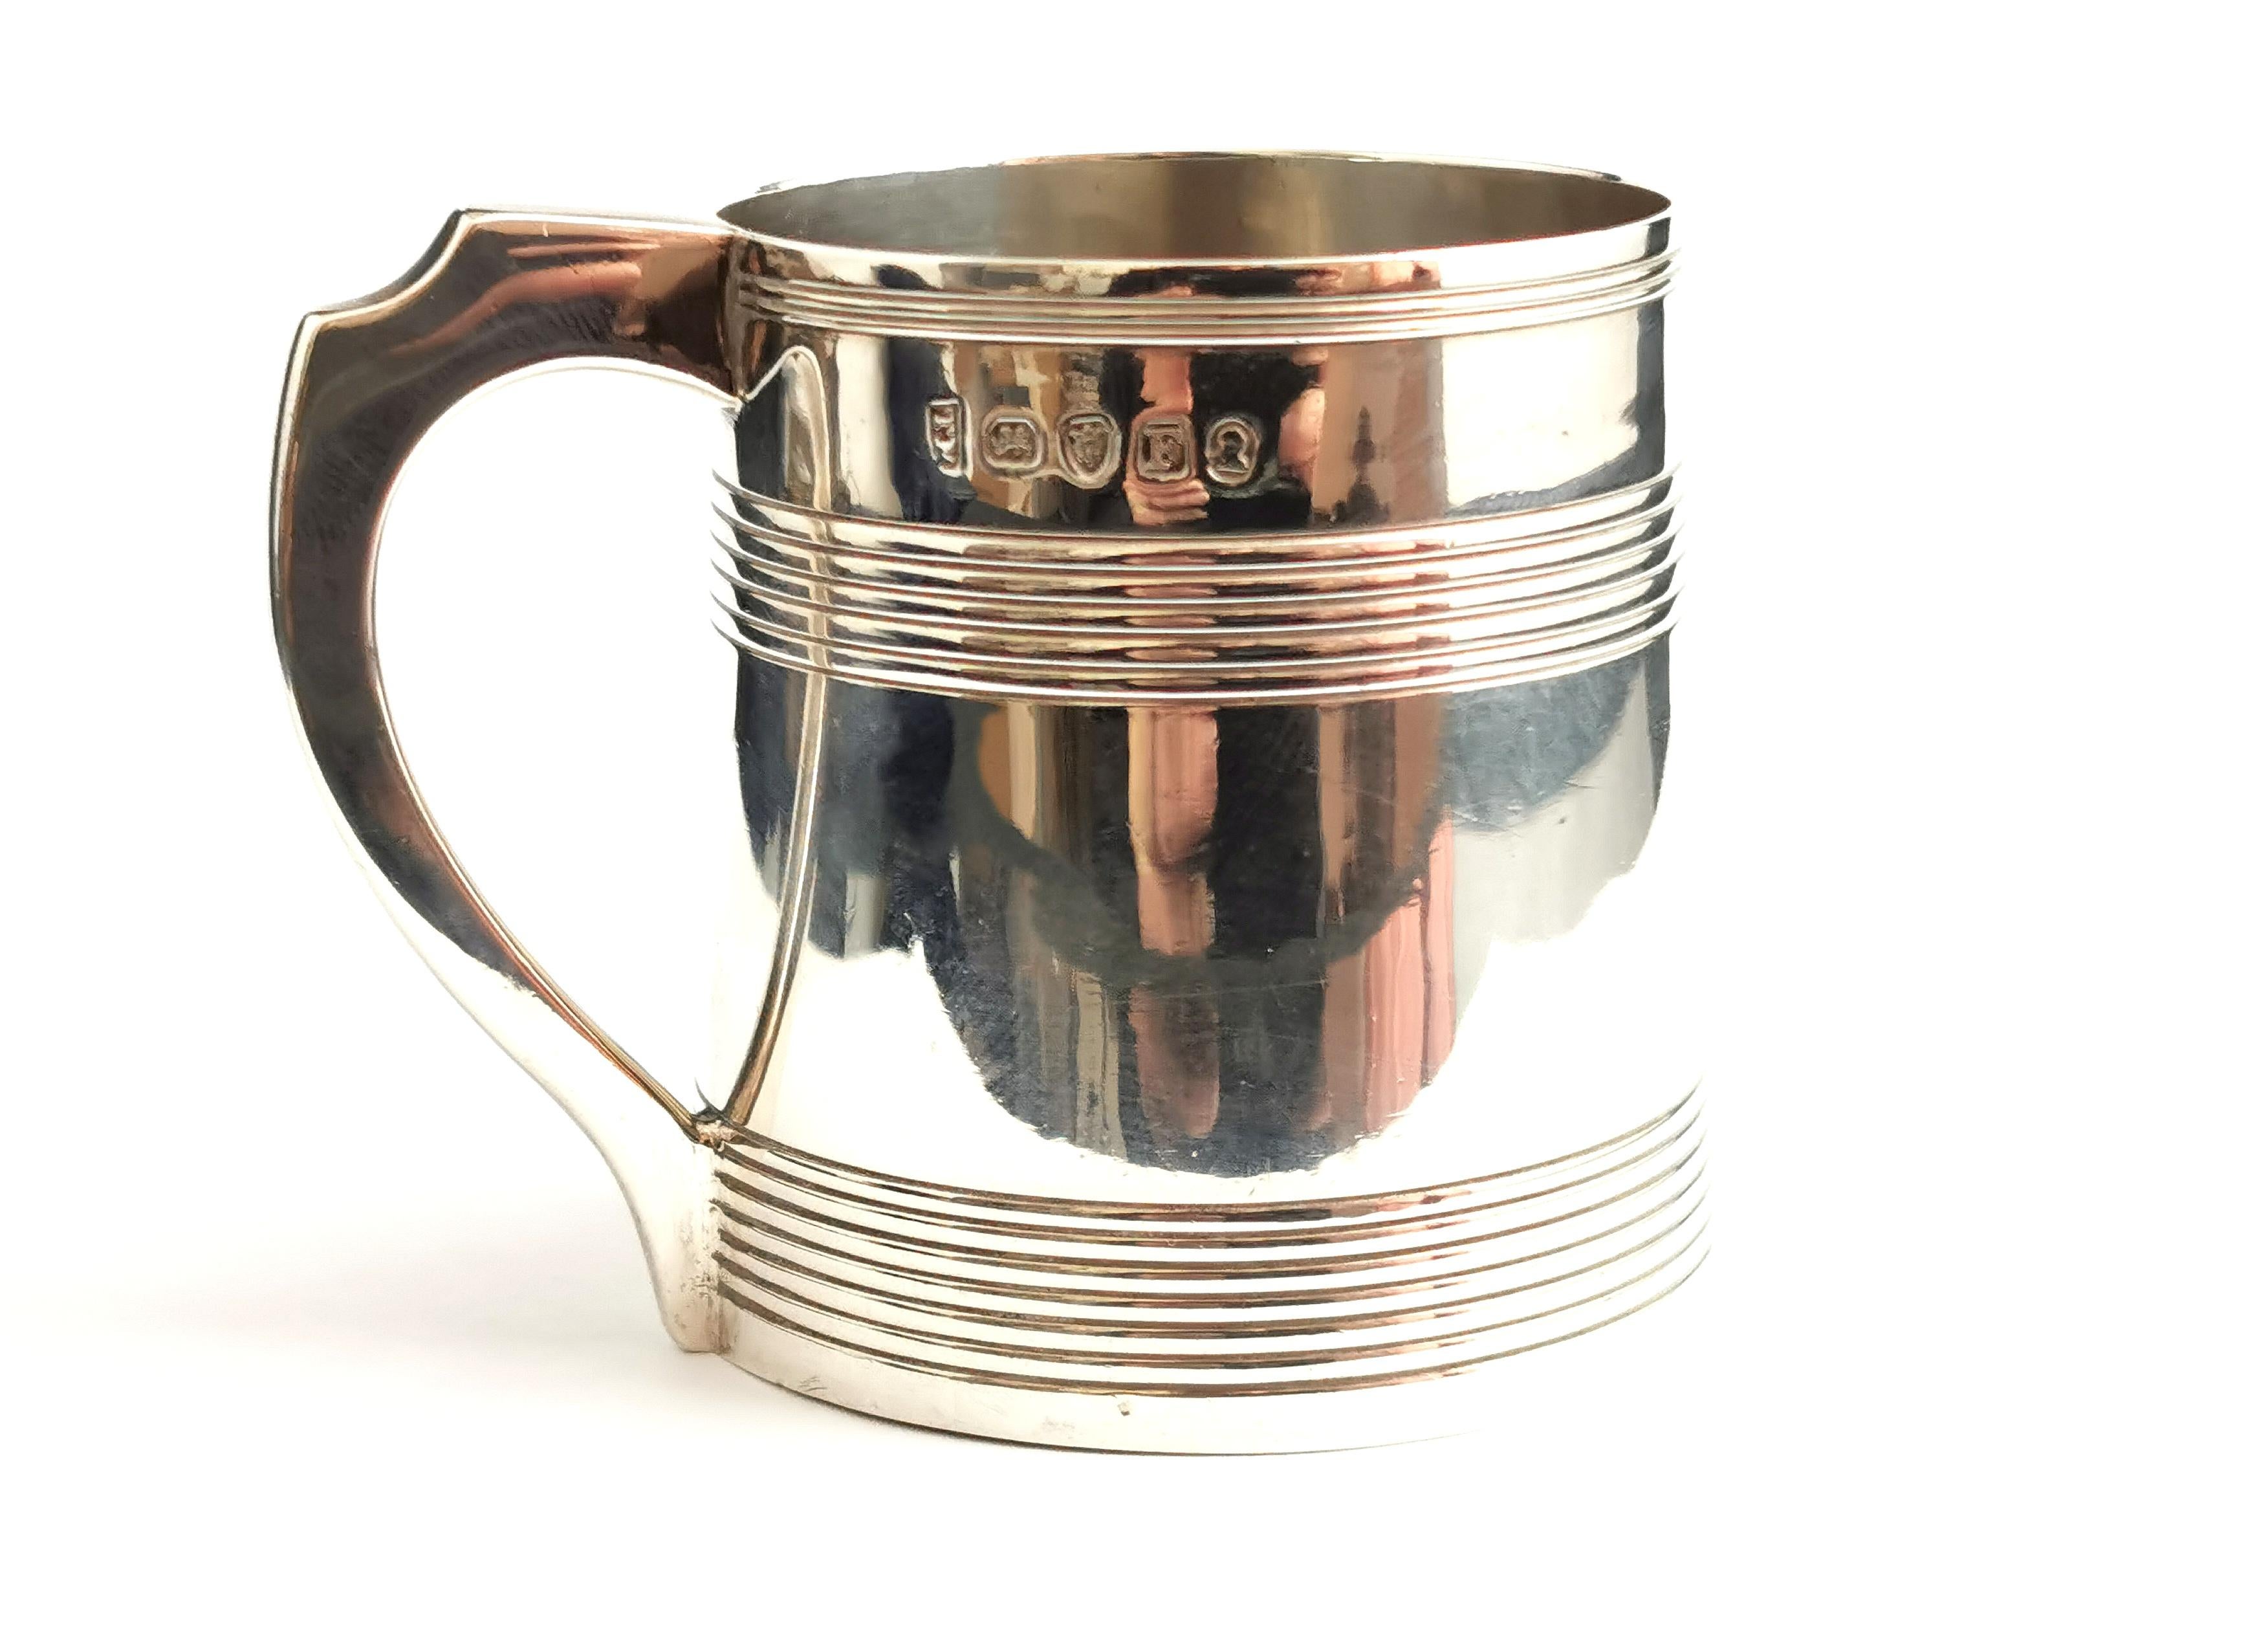 A delightful antique Georgian era sterling silver mug.

It has a reeded gadrooned design to the upper half.

A smaller sized mug and a squared scrolling handle, possibly a christening mug or half pint mug.

It is made from solid sterling